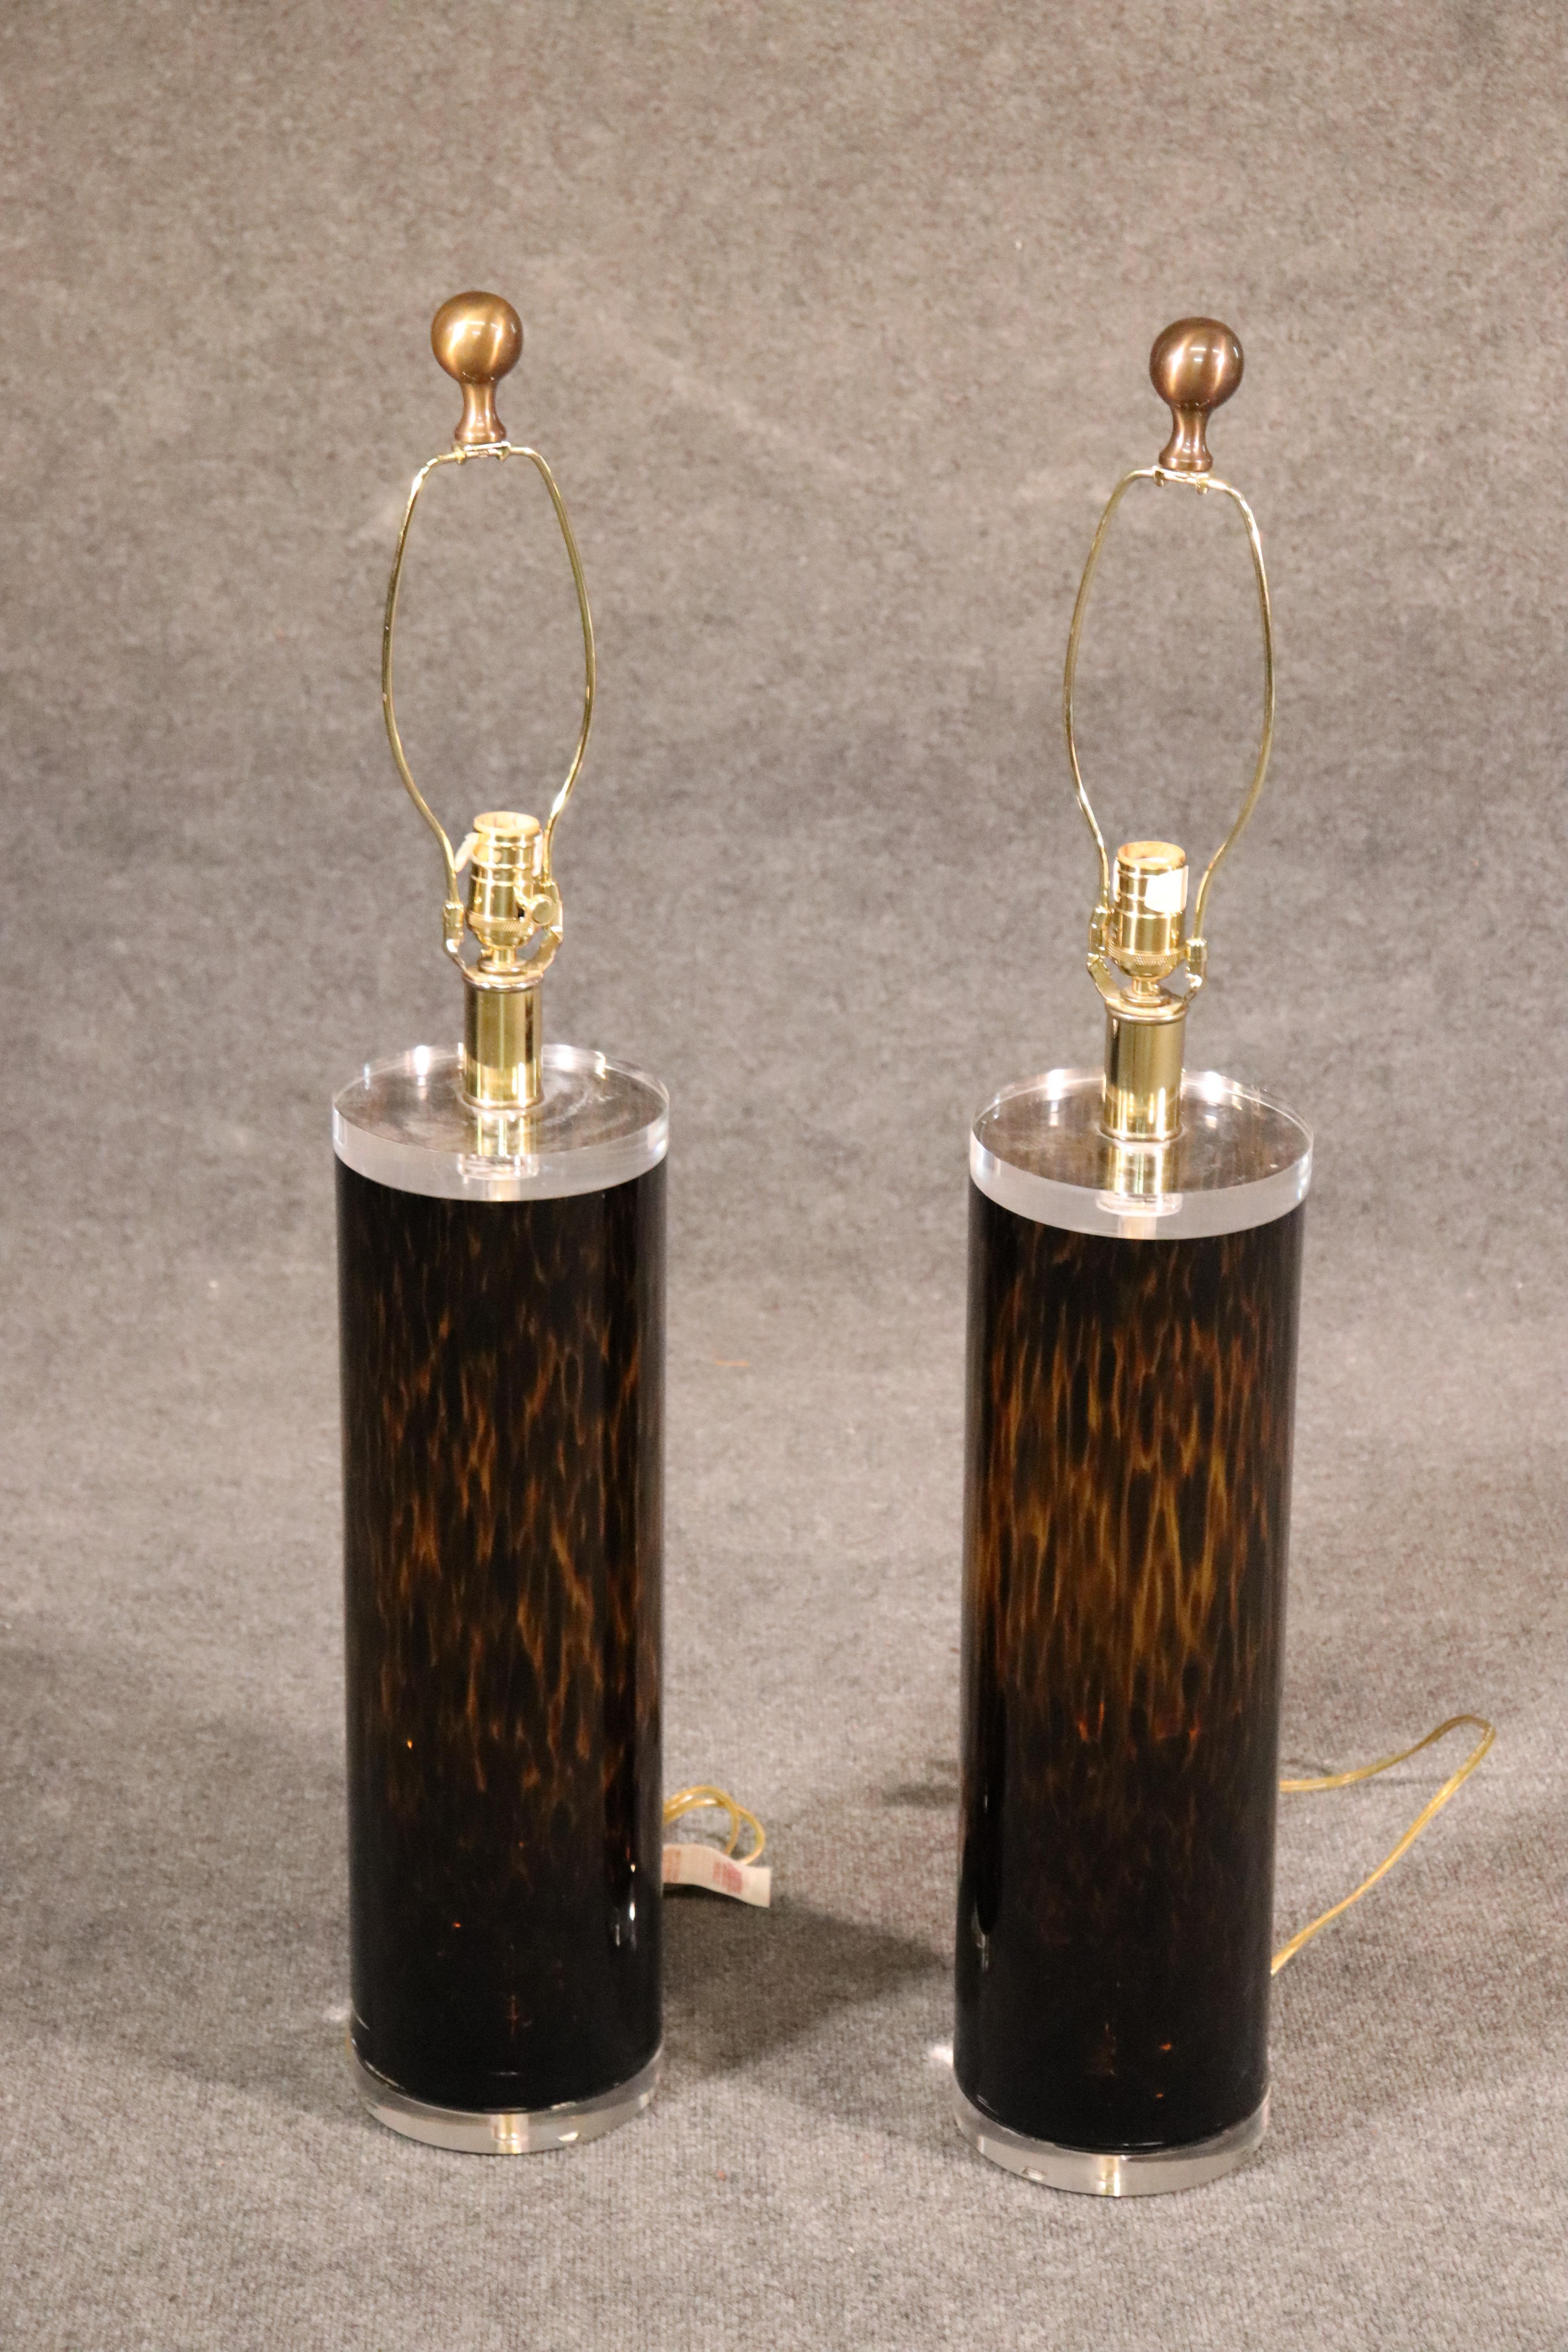 These are fantastic, heavy gorgeous Italian-made Lucite lamps. They are beautifully made to look like faux tortoise shell with Lucite tops and bases and solid brass finials. The table lamps are in superb condition and have minimal wear and signs of